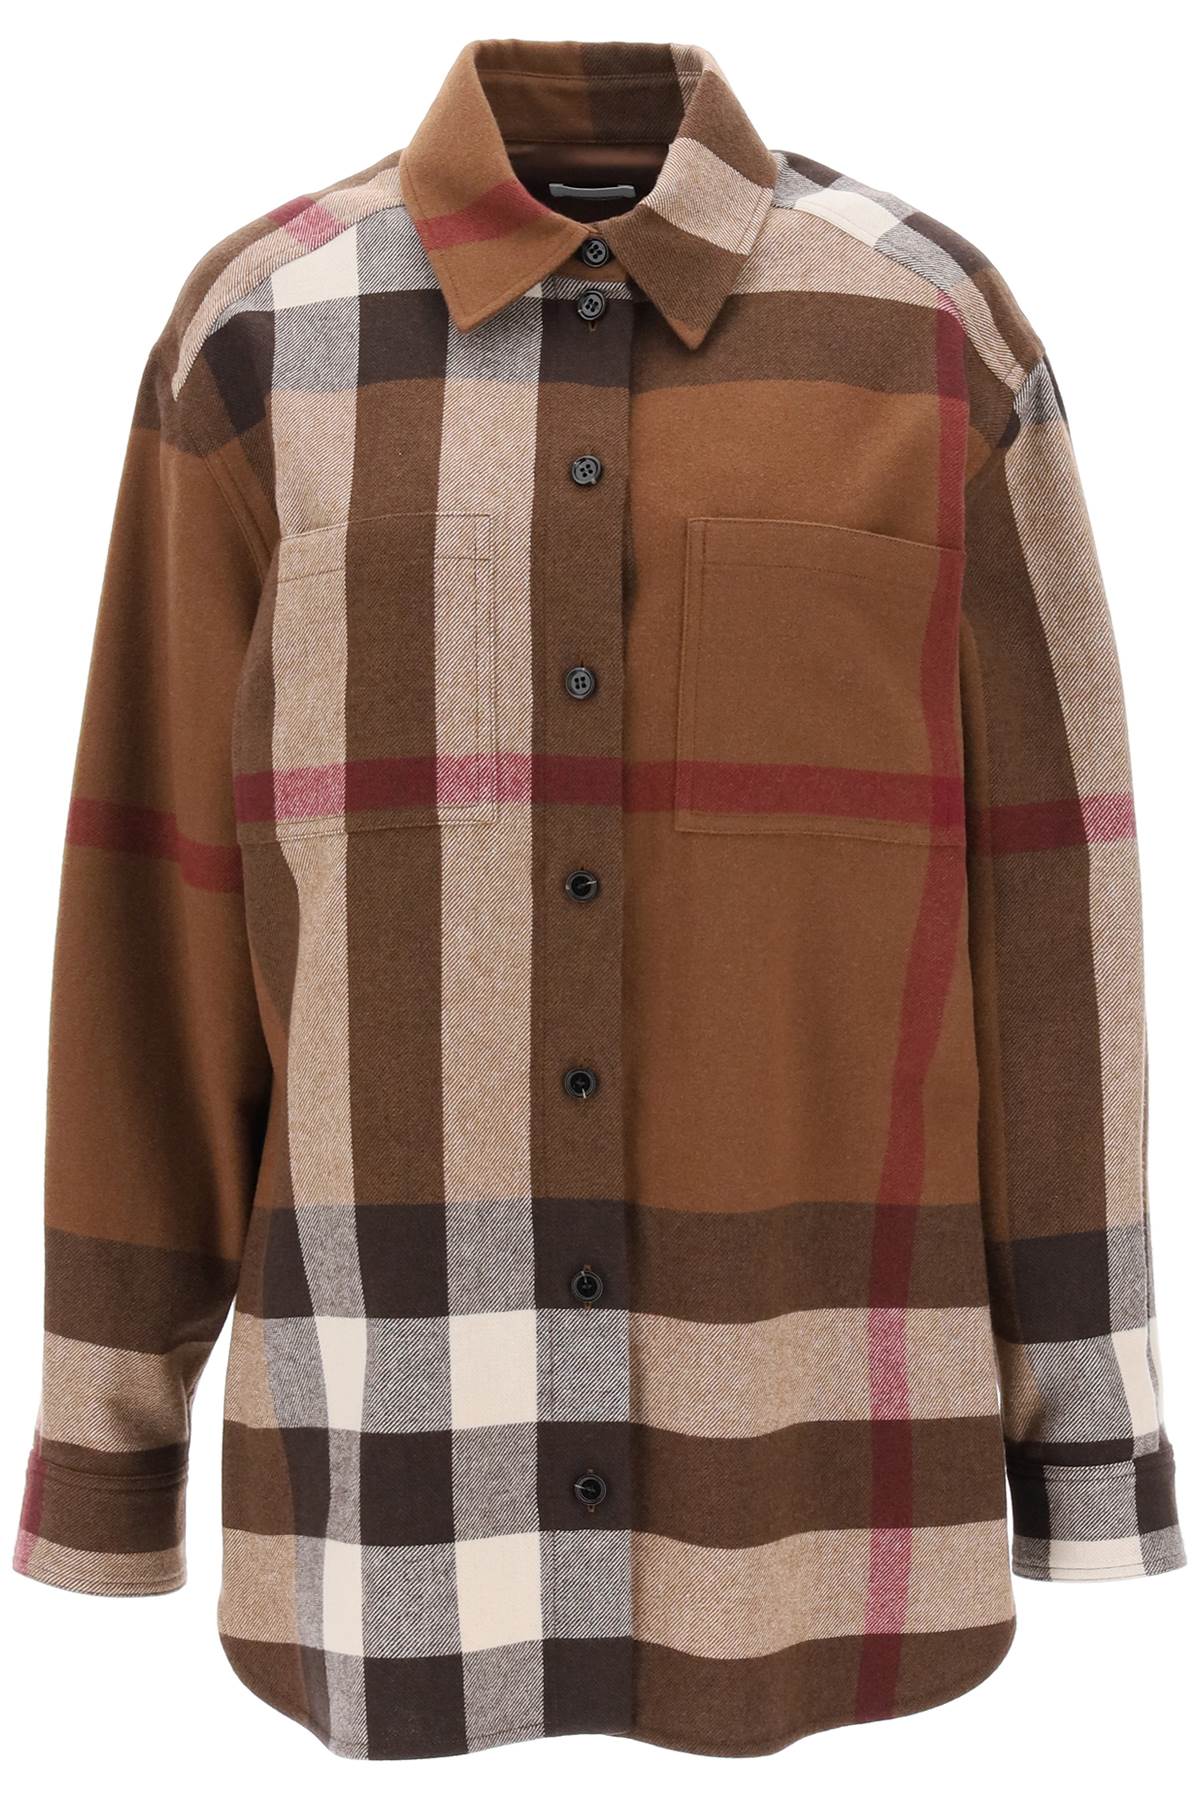 Burberry Avalon Overshirt In Check Flannel-Burberry-6-Urbanheer